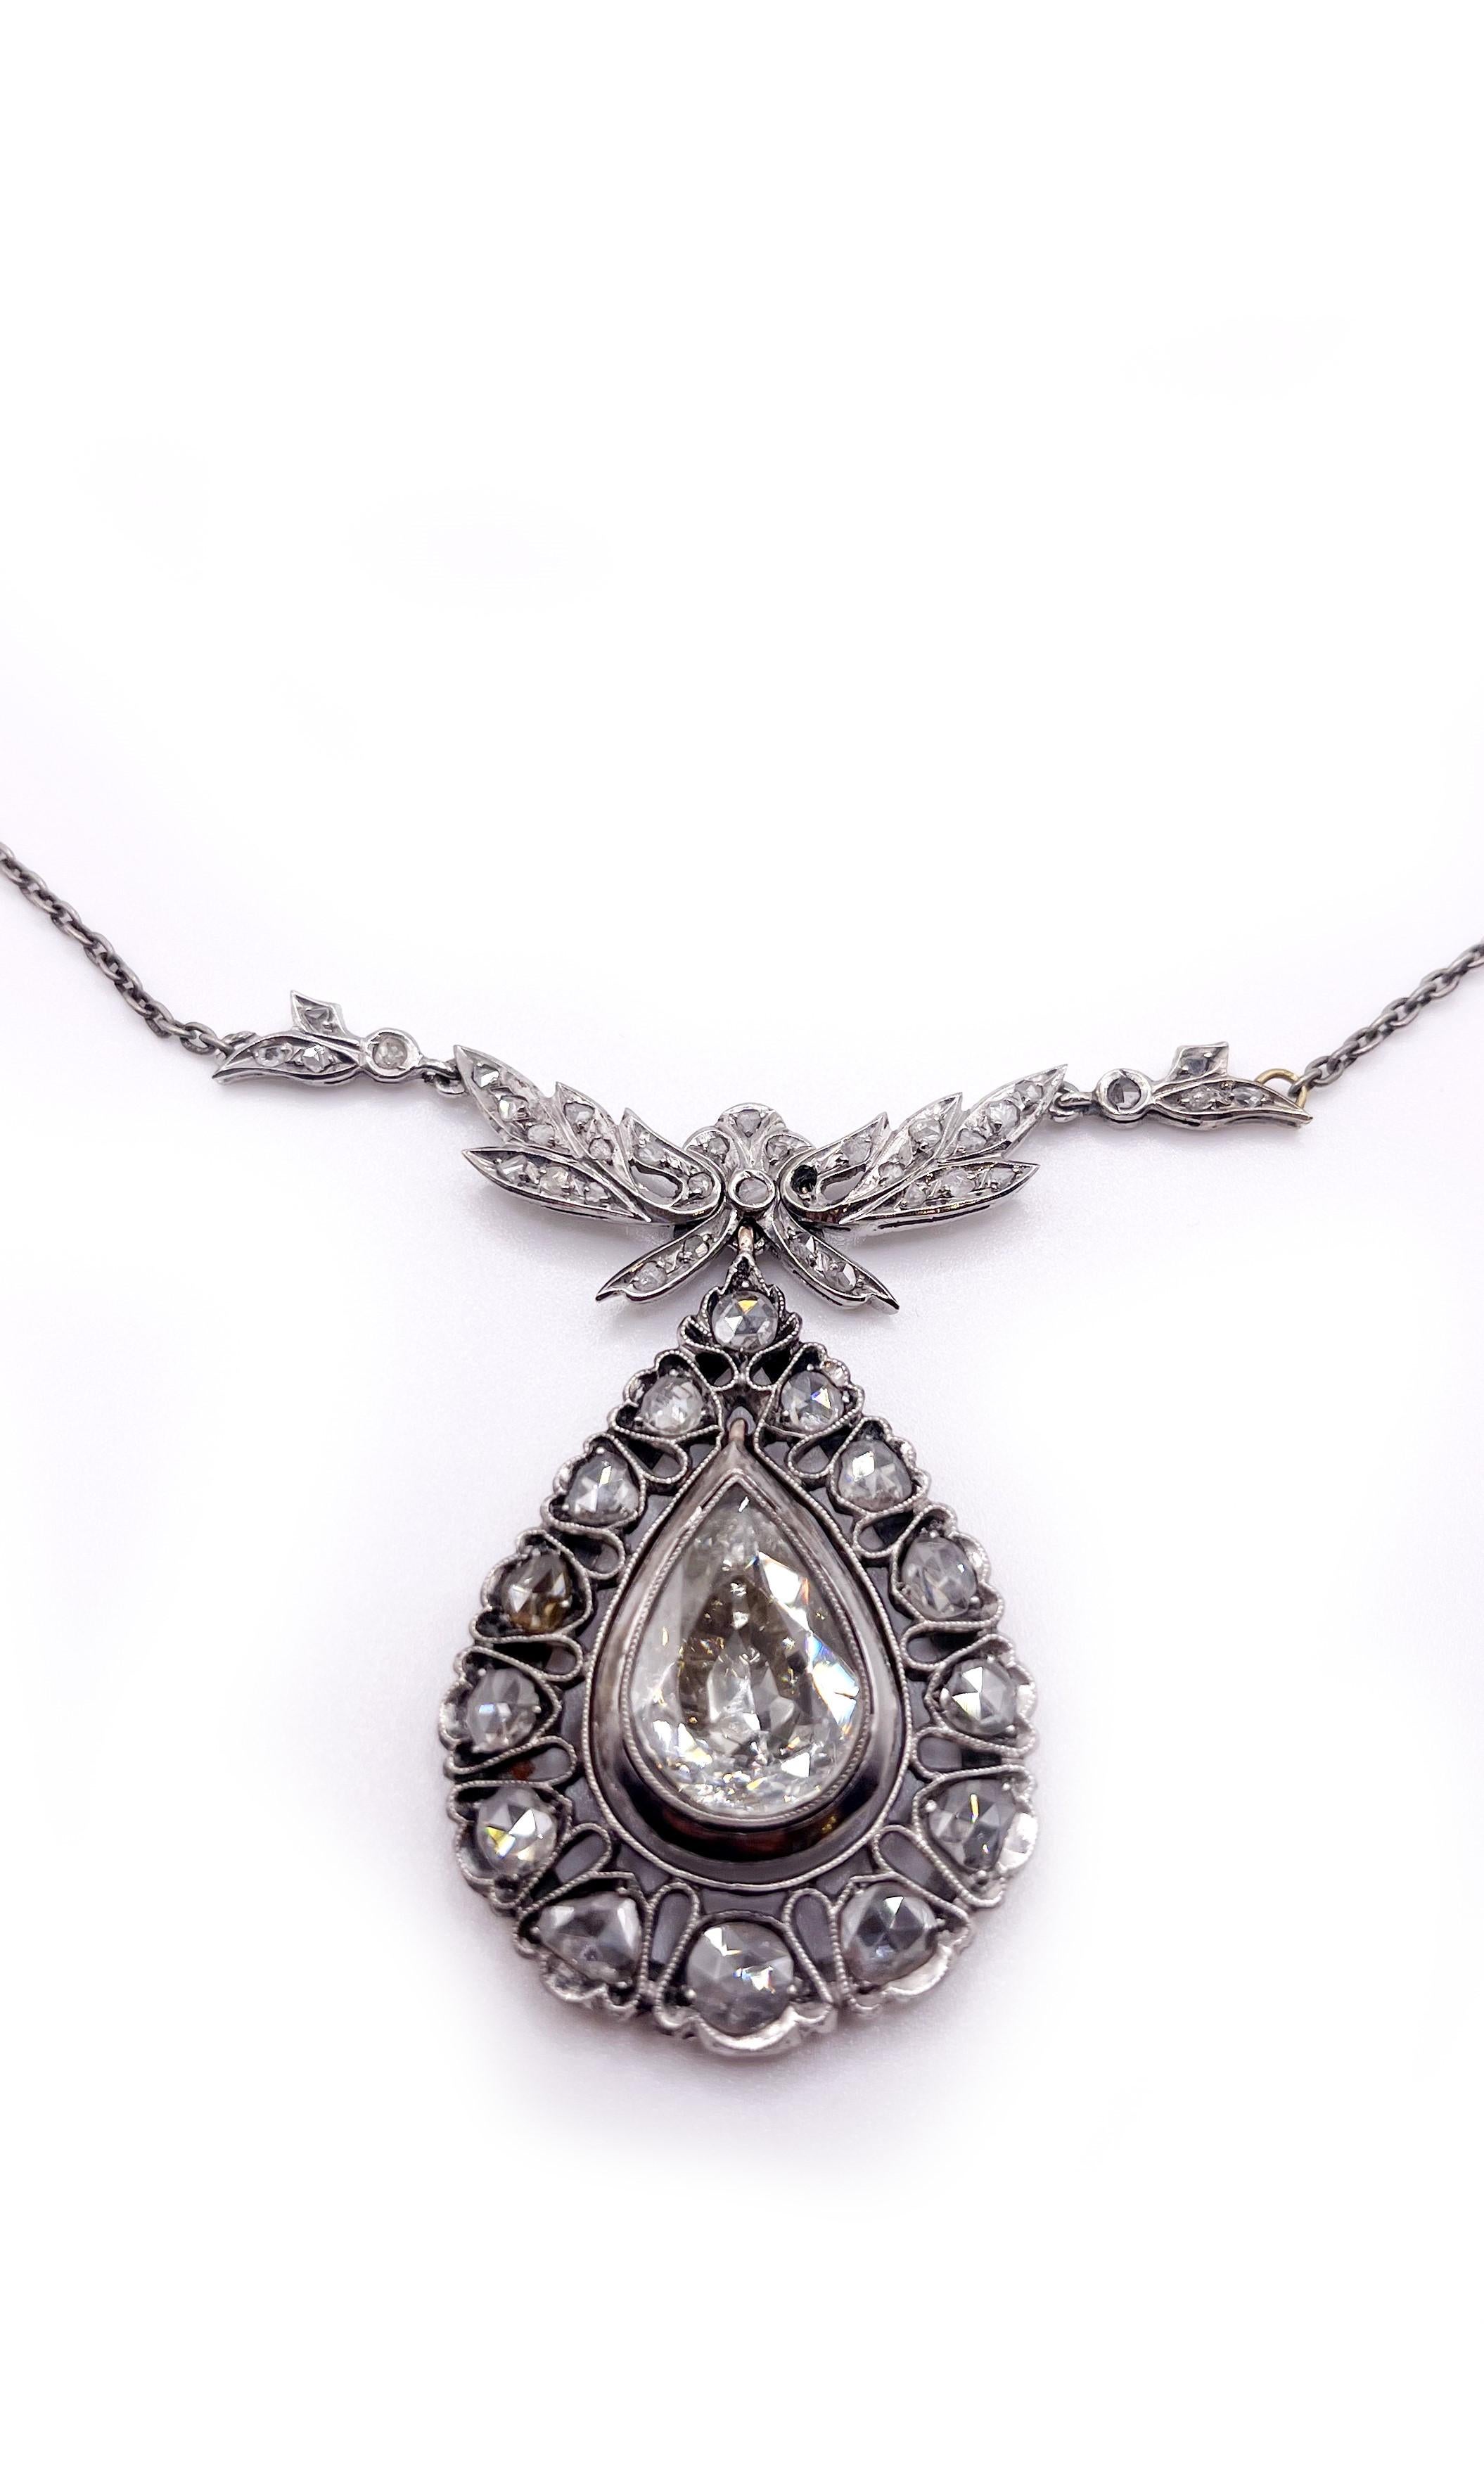 Stunning vintage rose cut diamond drop pendent necklace.
approximately 4.00 carats central pear rose cut diamond . approximately G color and VS clarity .
the central rose diamond surrounded by 15 smaller rose cut diamond in approximately 2.00 carats.